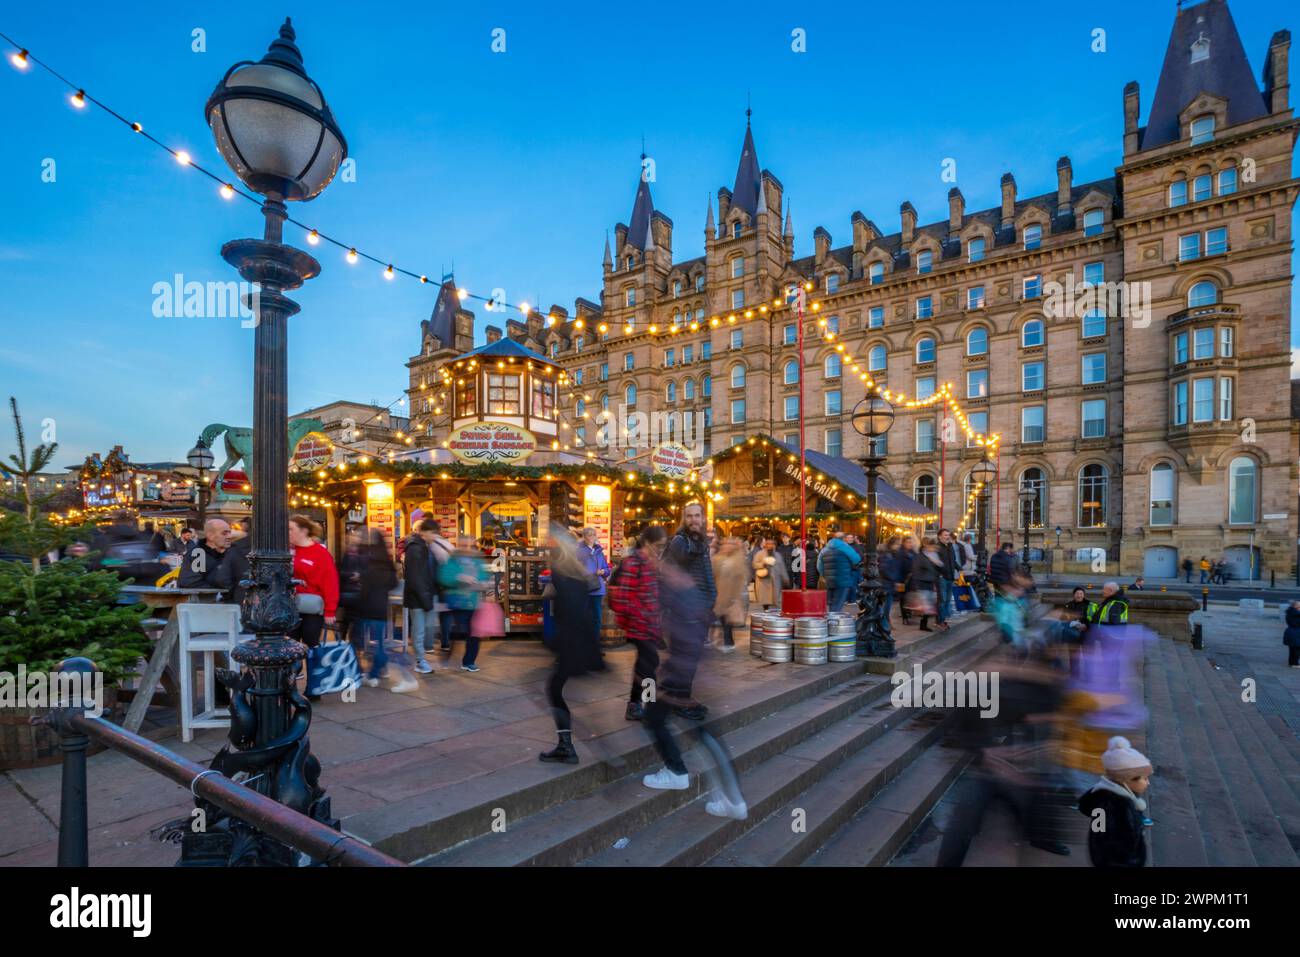 View of Christmas Market at St. Georges Hall, Liverpool City Centre, Liverpool, Merseyside, England, United Kingdom, Europe Stock Photo